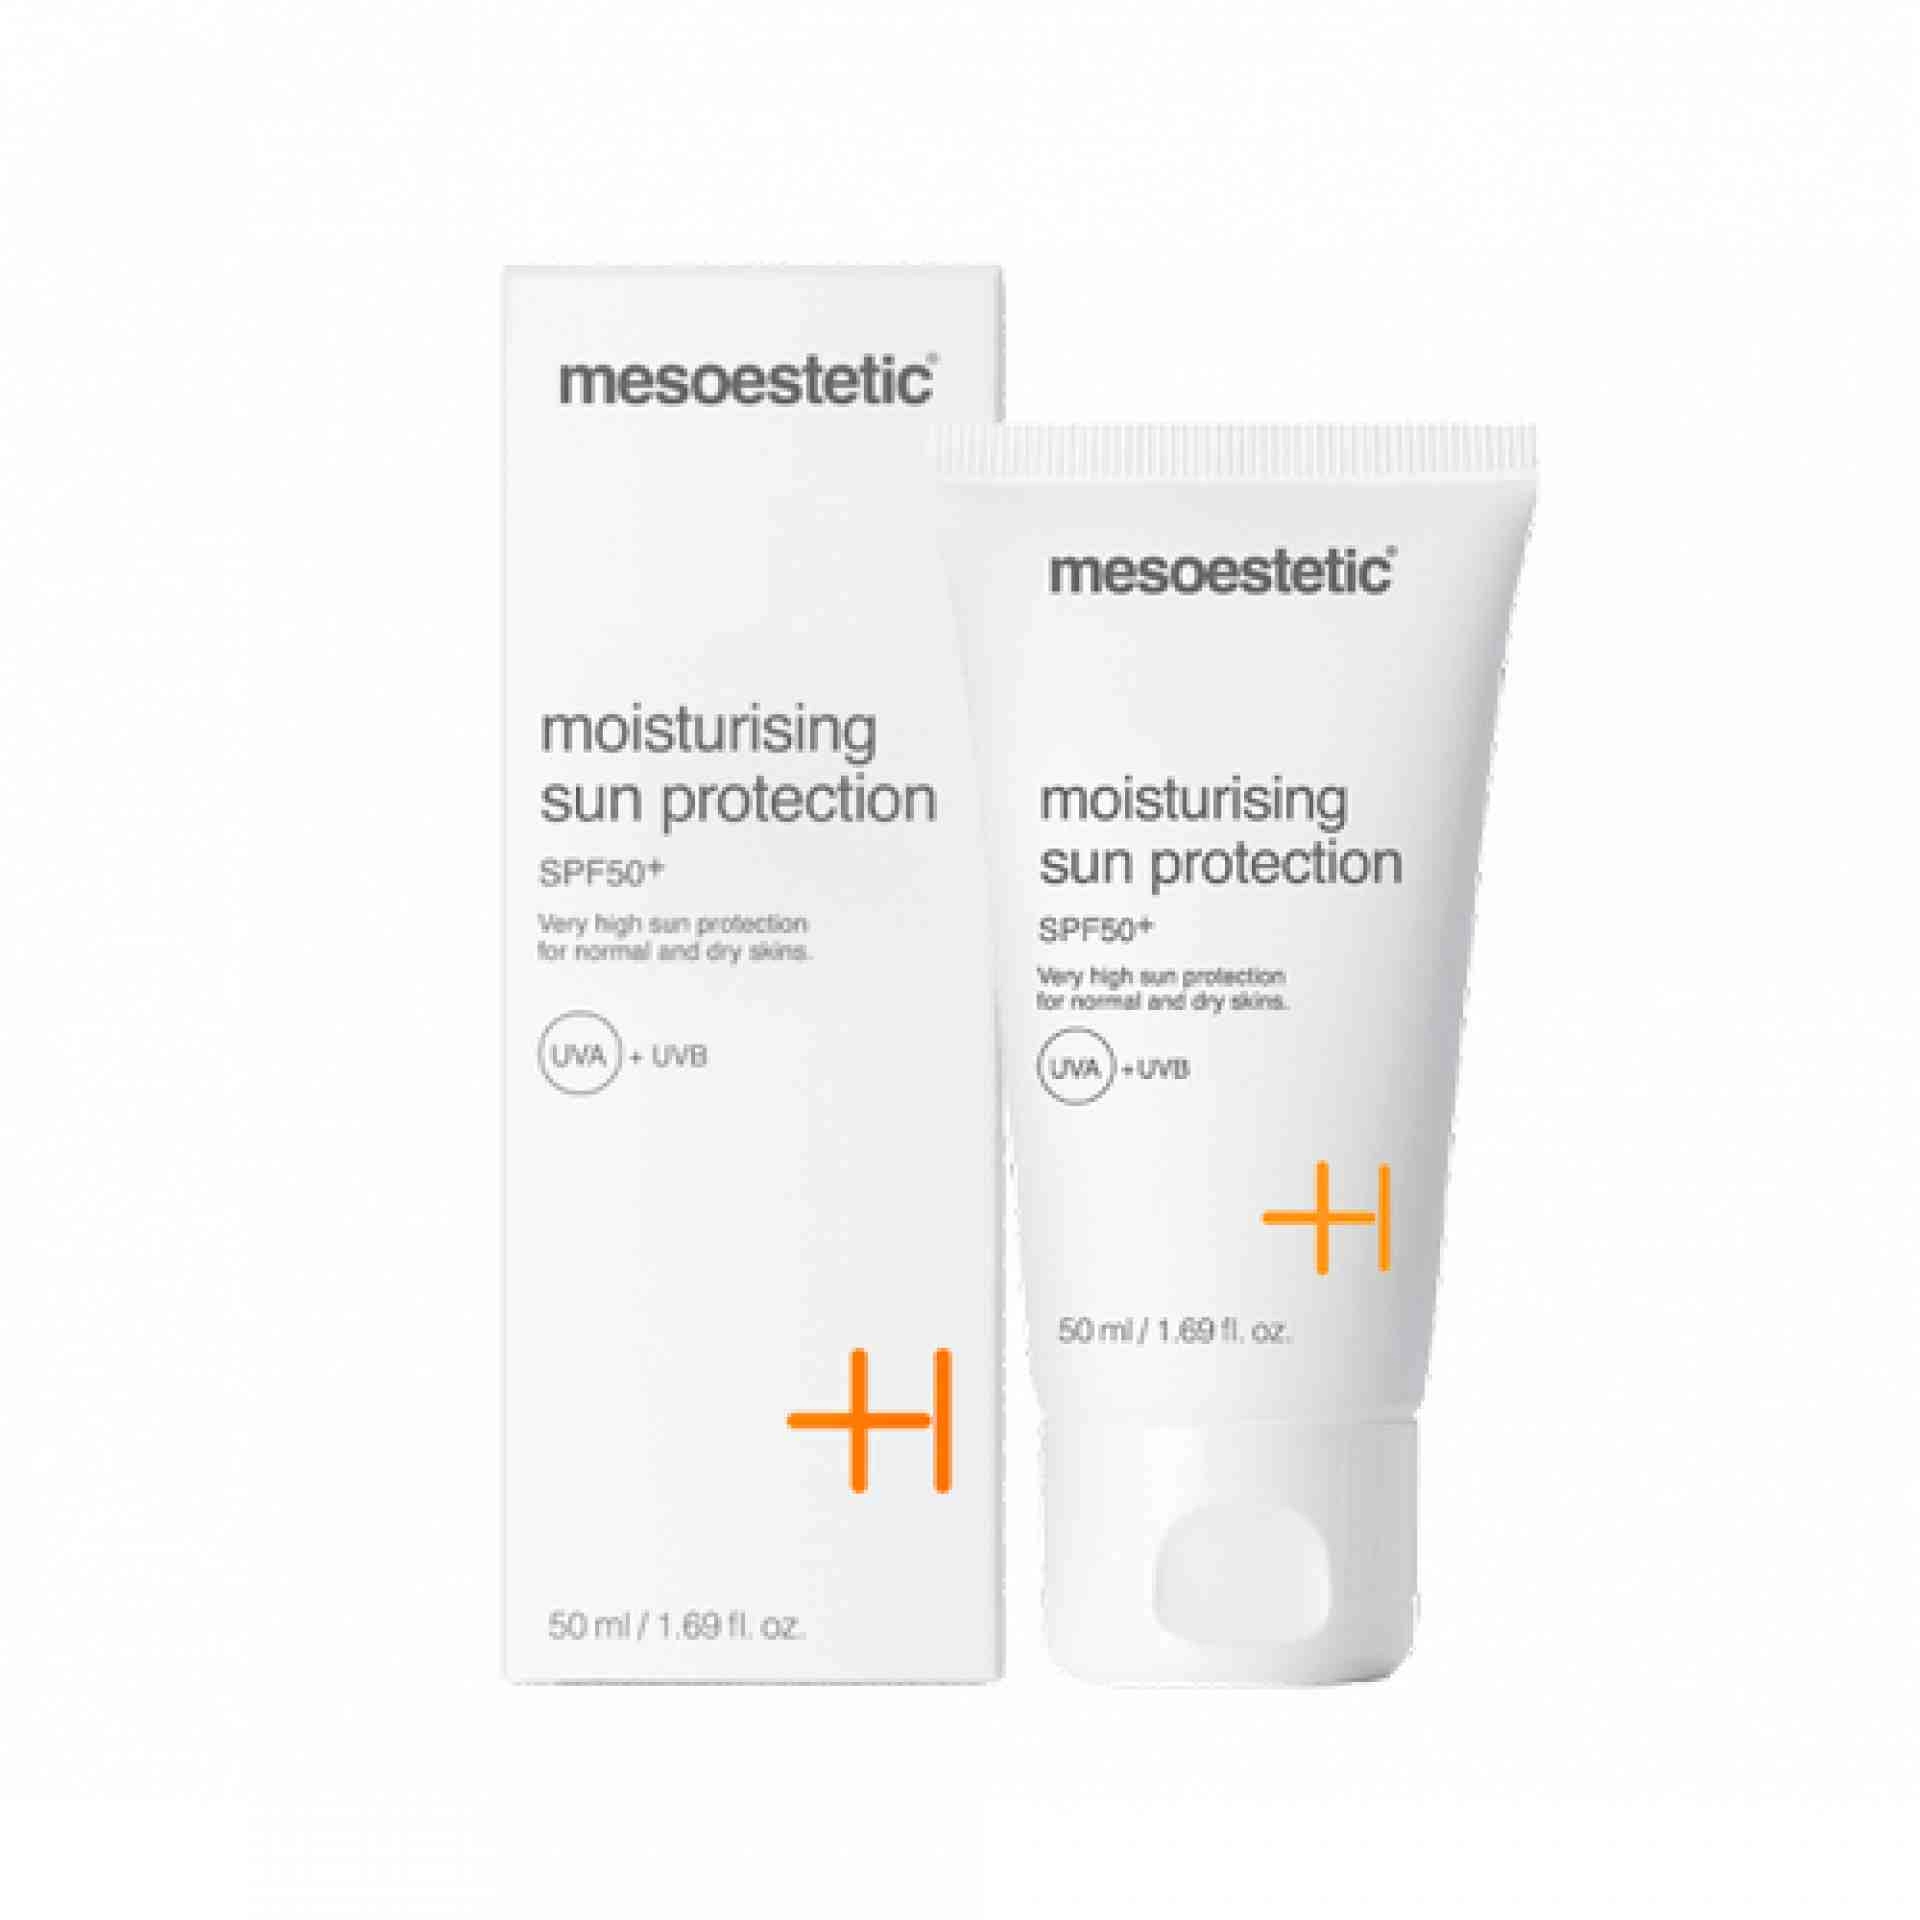 Moisturising Sun Protection | Protector Solar 50ml - Photoprotection Solutions - Mesoestetic ®